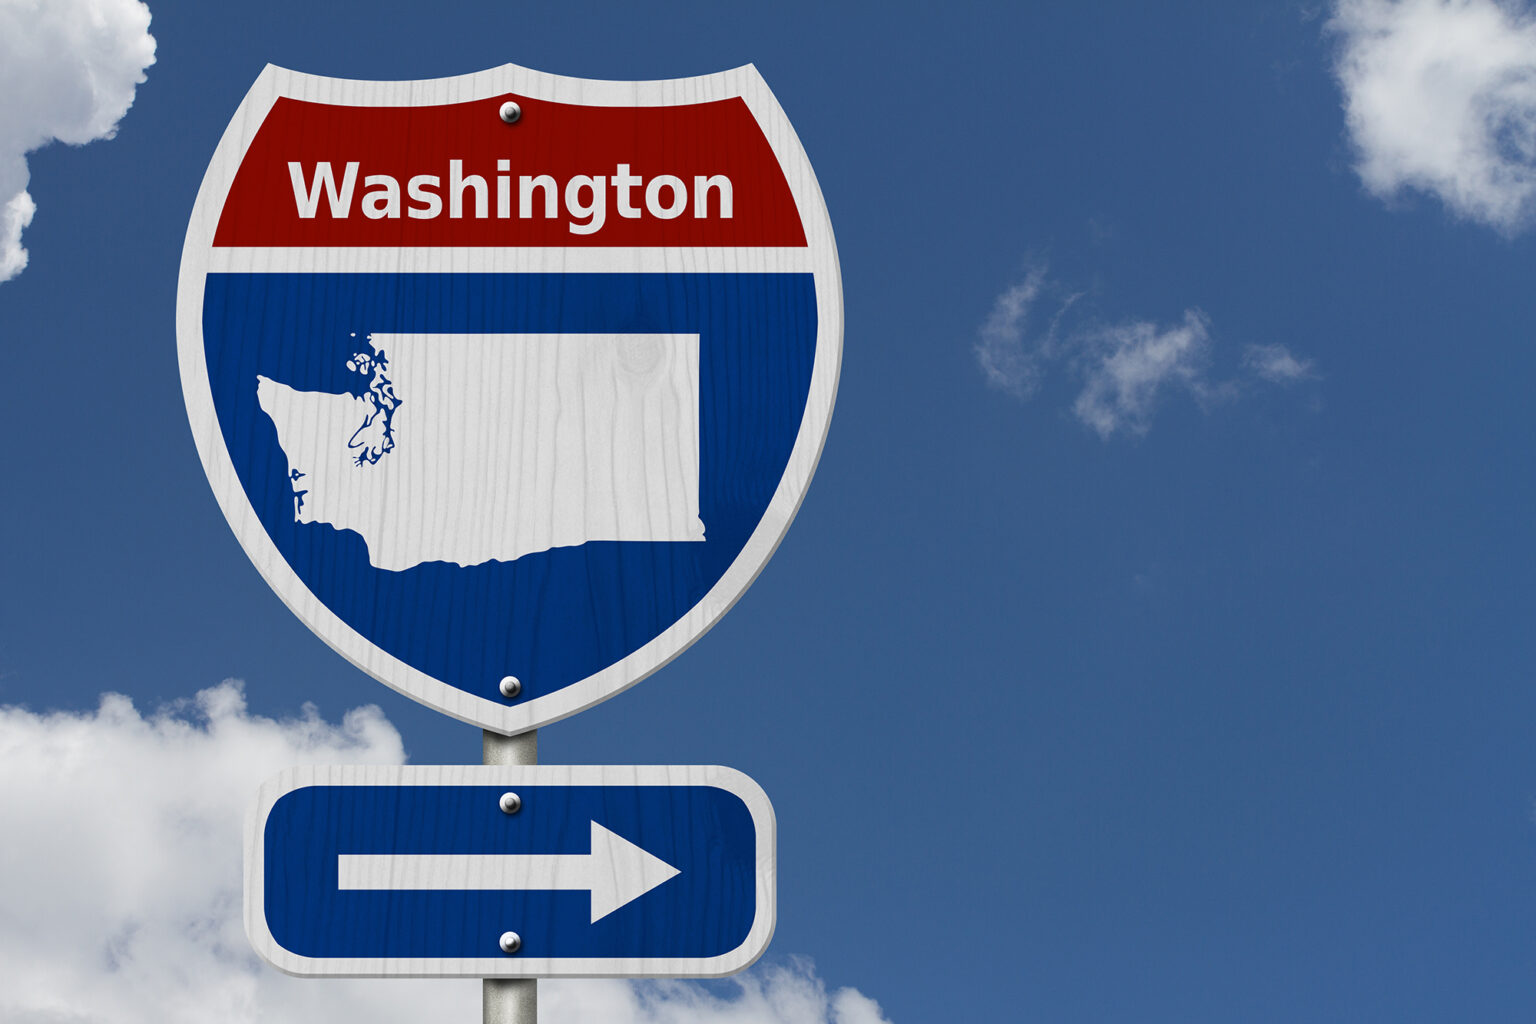 Road sign that says Washington which an image of the state and an arrow pointing to the right with a blue sky in the background